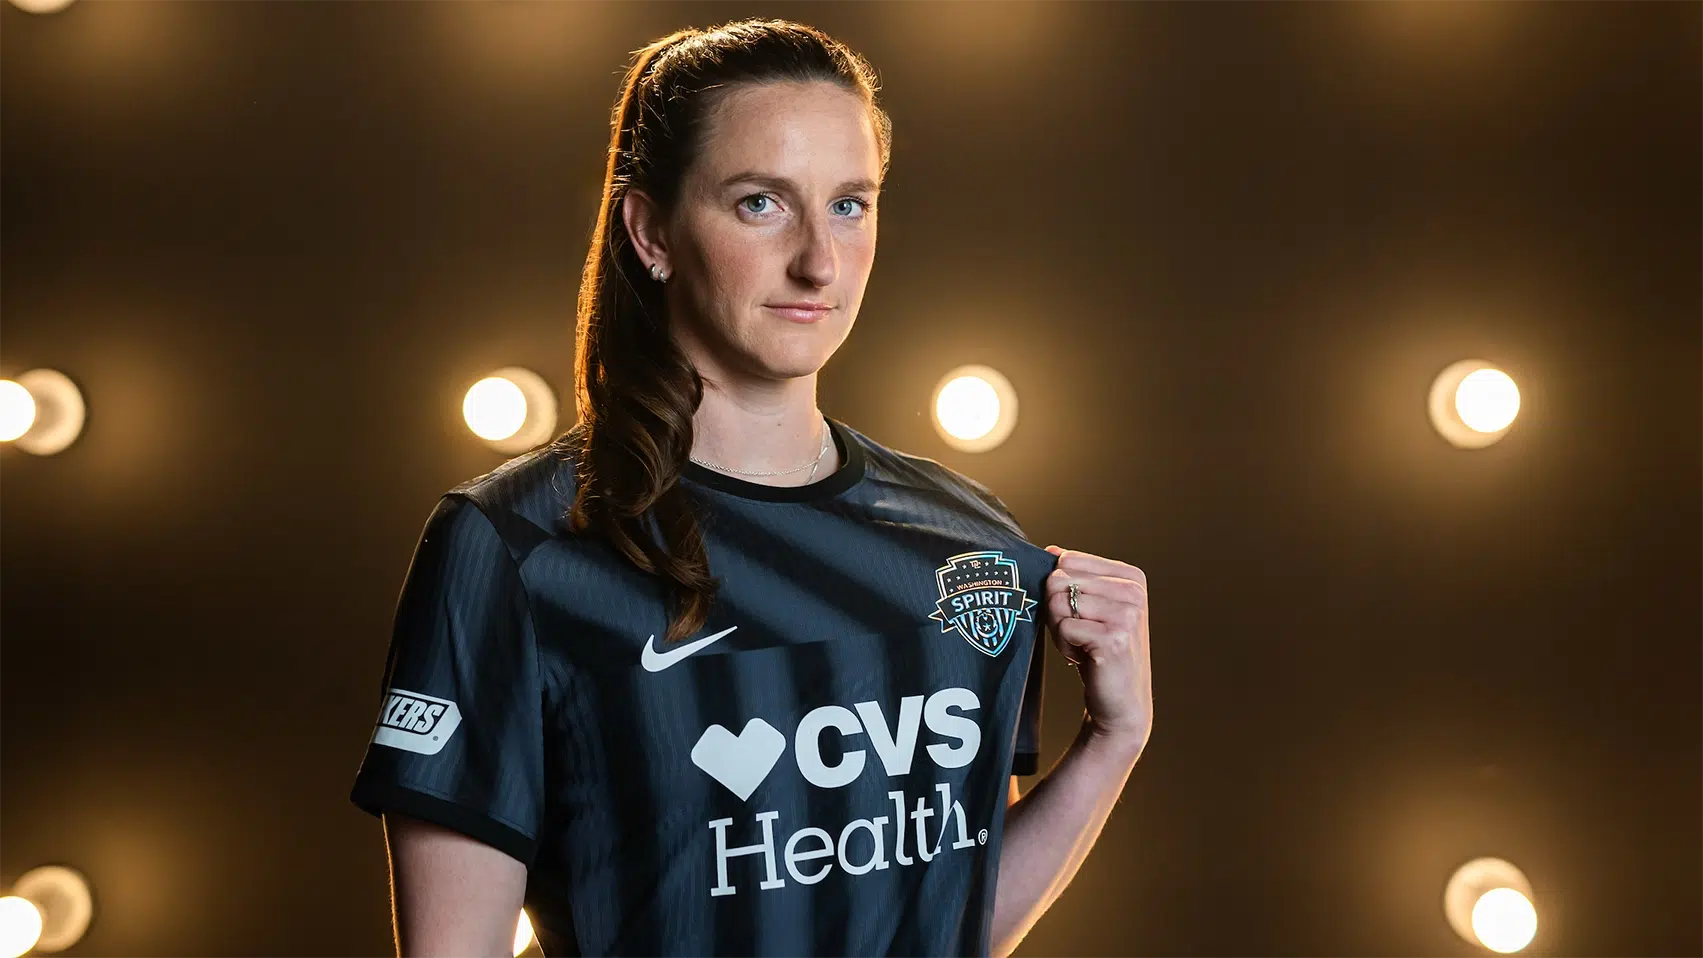 Andi Sullivan holds out the Washington Spirit crest on her black jersey while standing in front of a wall of light bulbs.